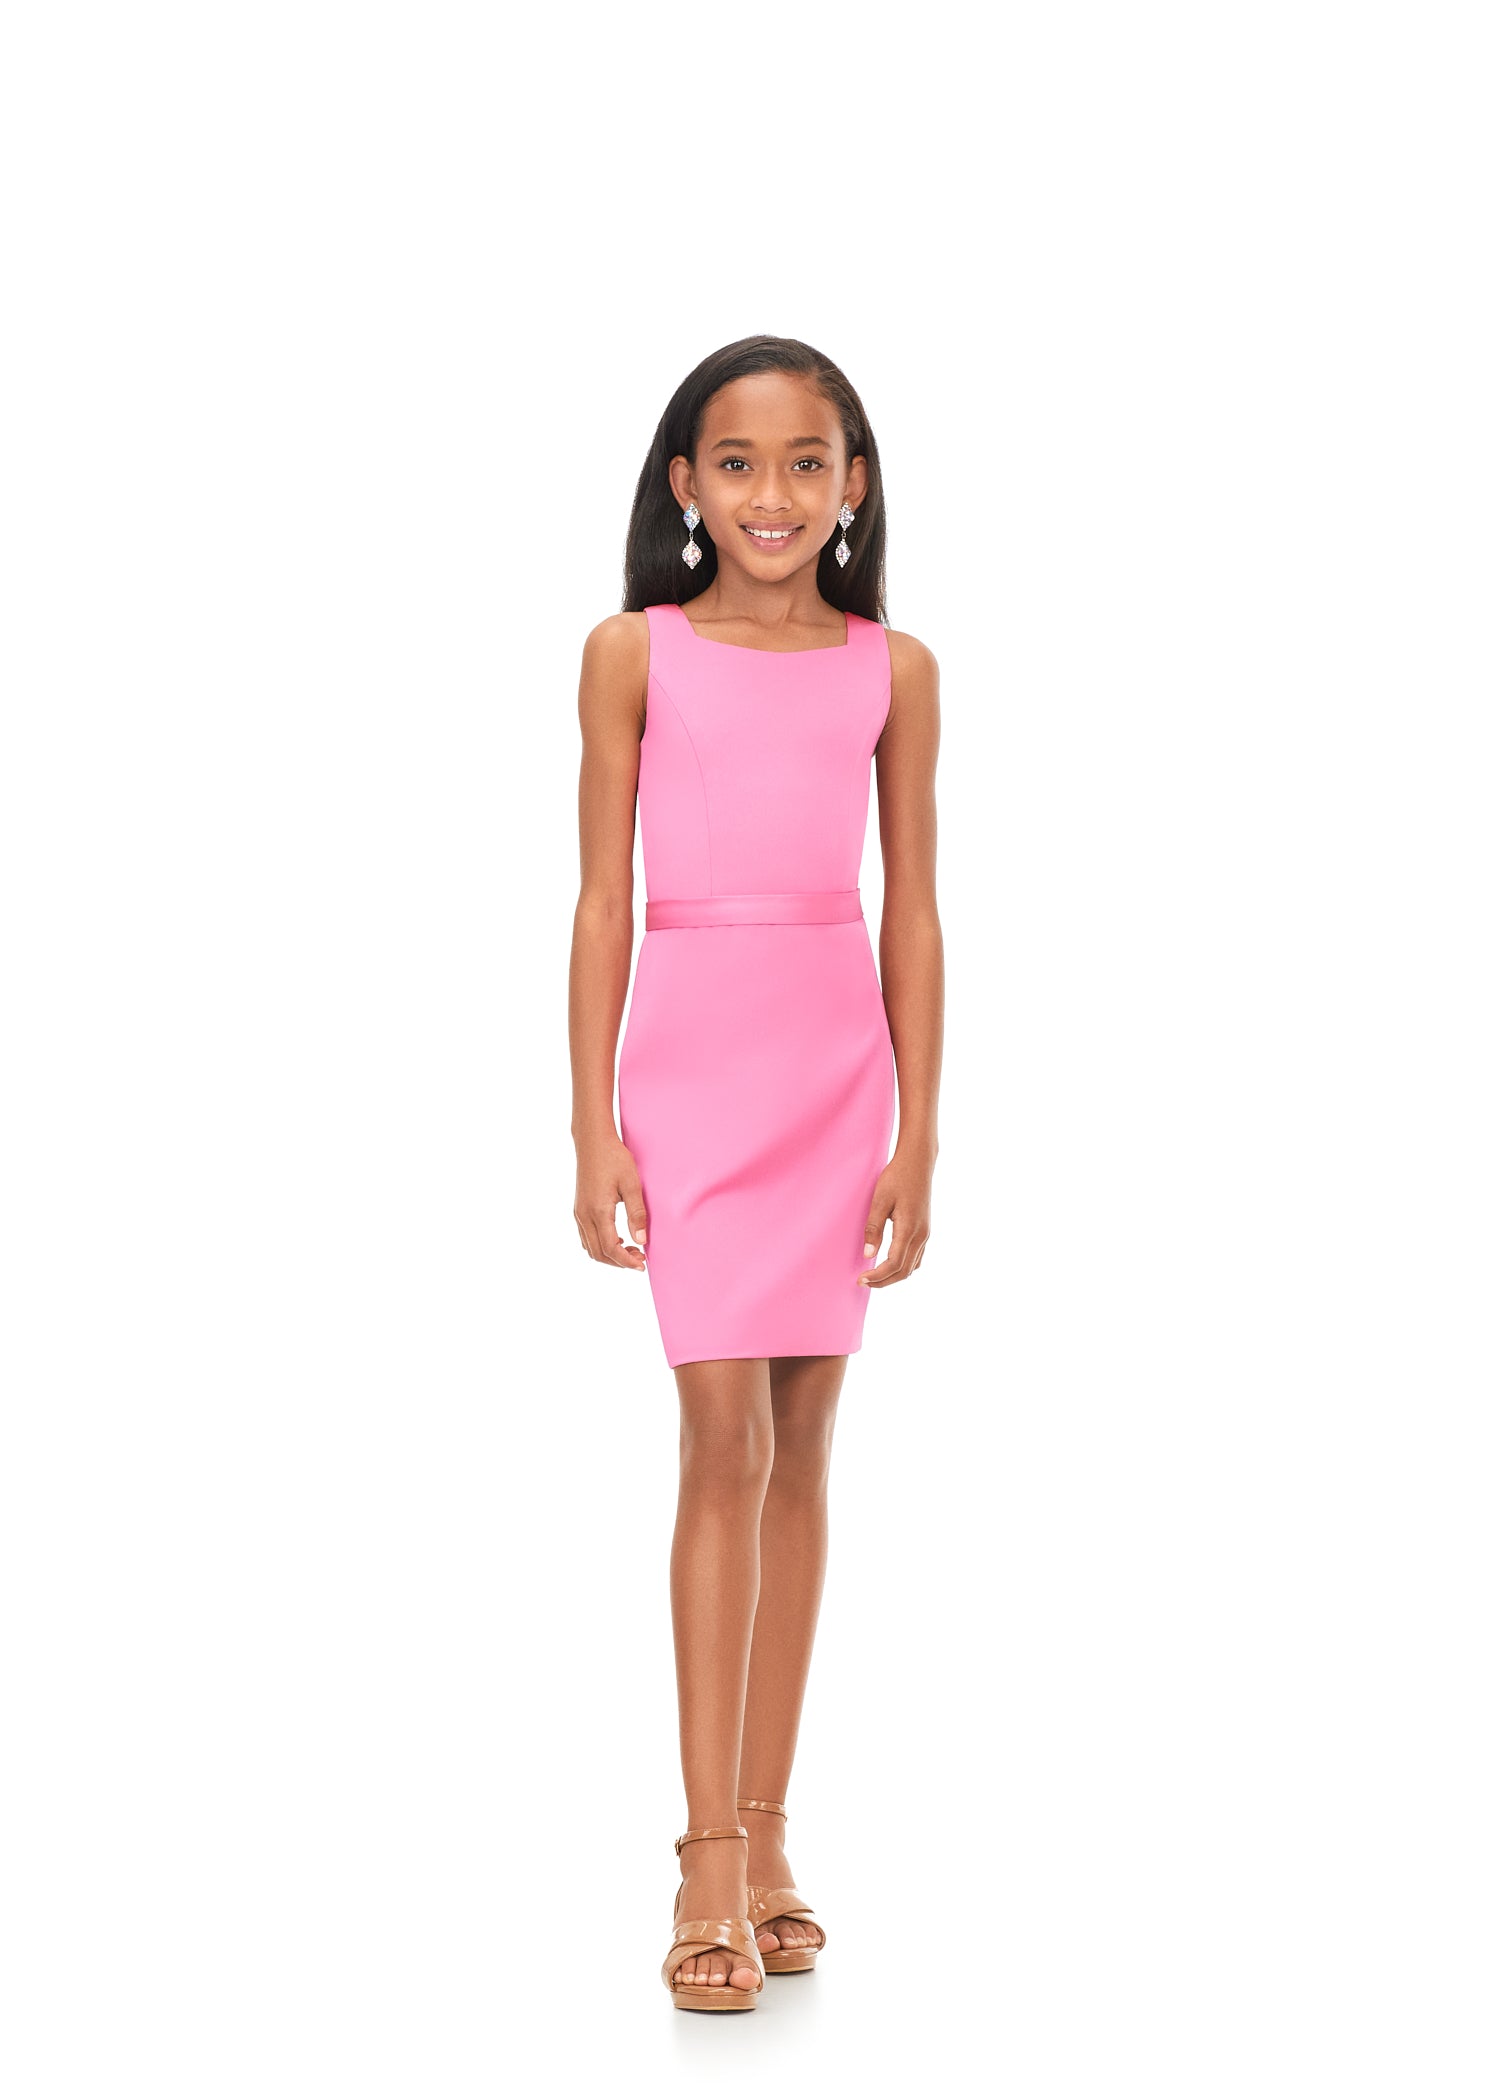 Ashley Lauren Kids 8166 Girls Cocktail Dress with Cape Bow